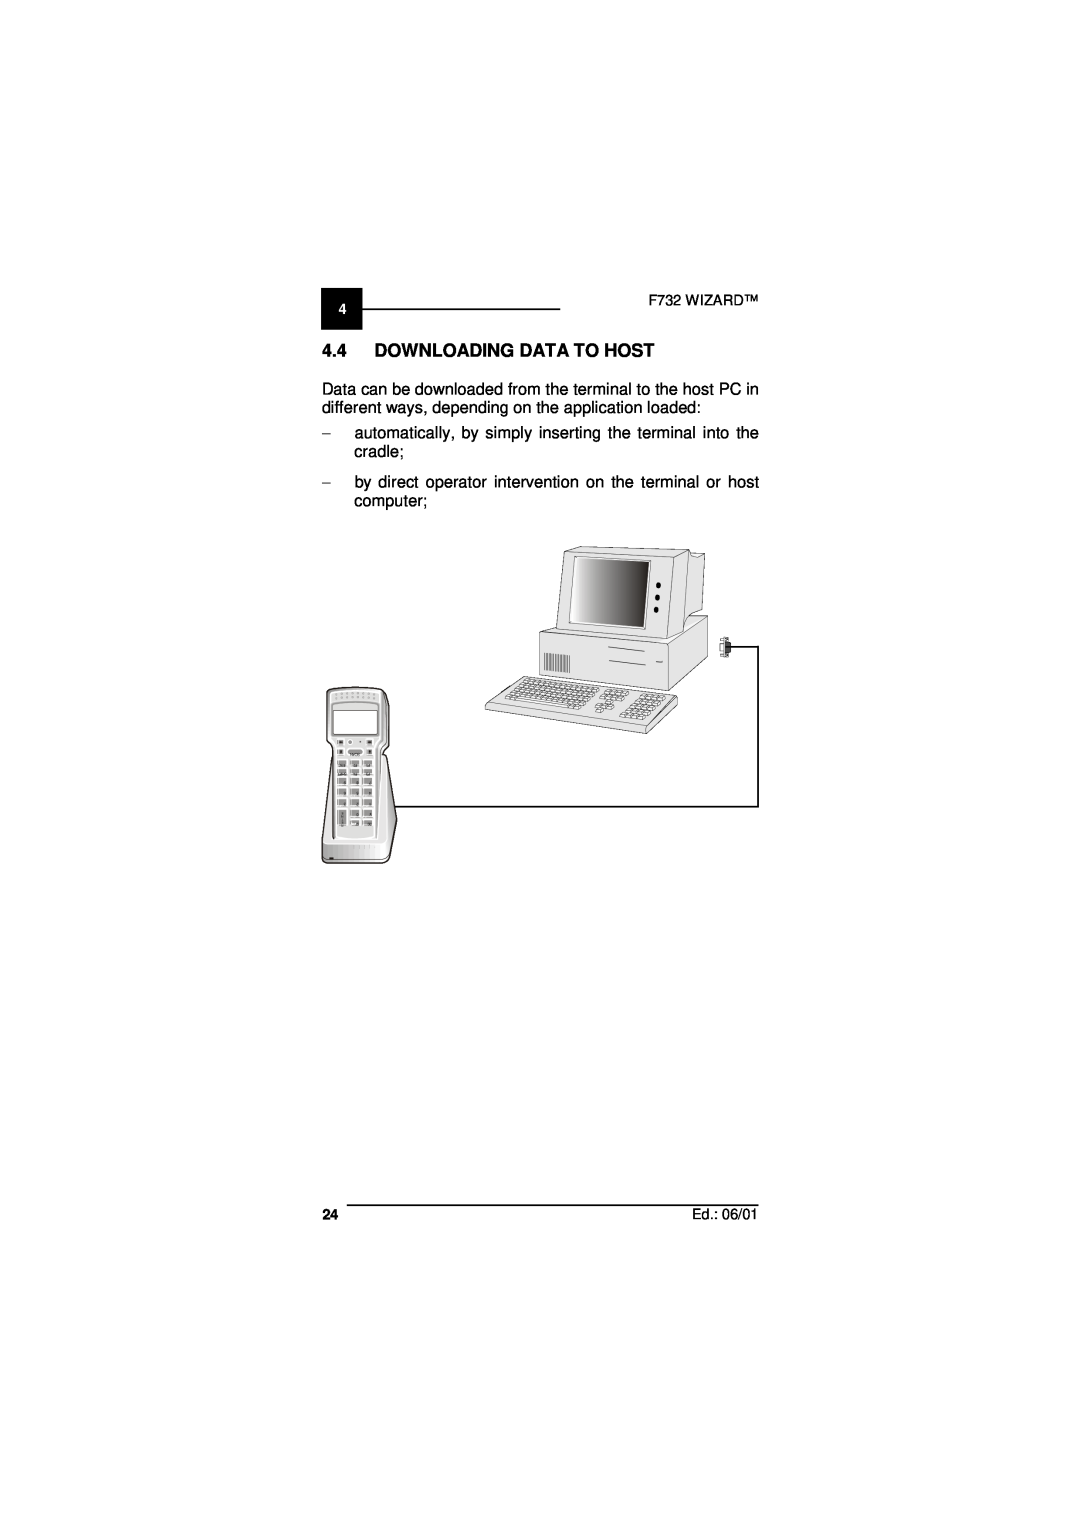 Datalogic Scanning user manual Downloading Data To Host, F732 WIZARD, Ed. 06/01, Nacs, Tfihs 